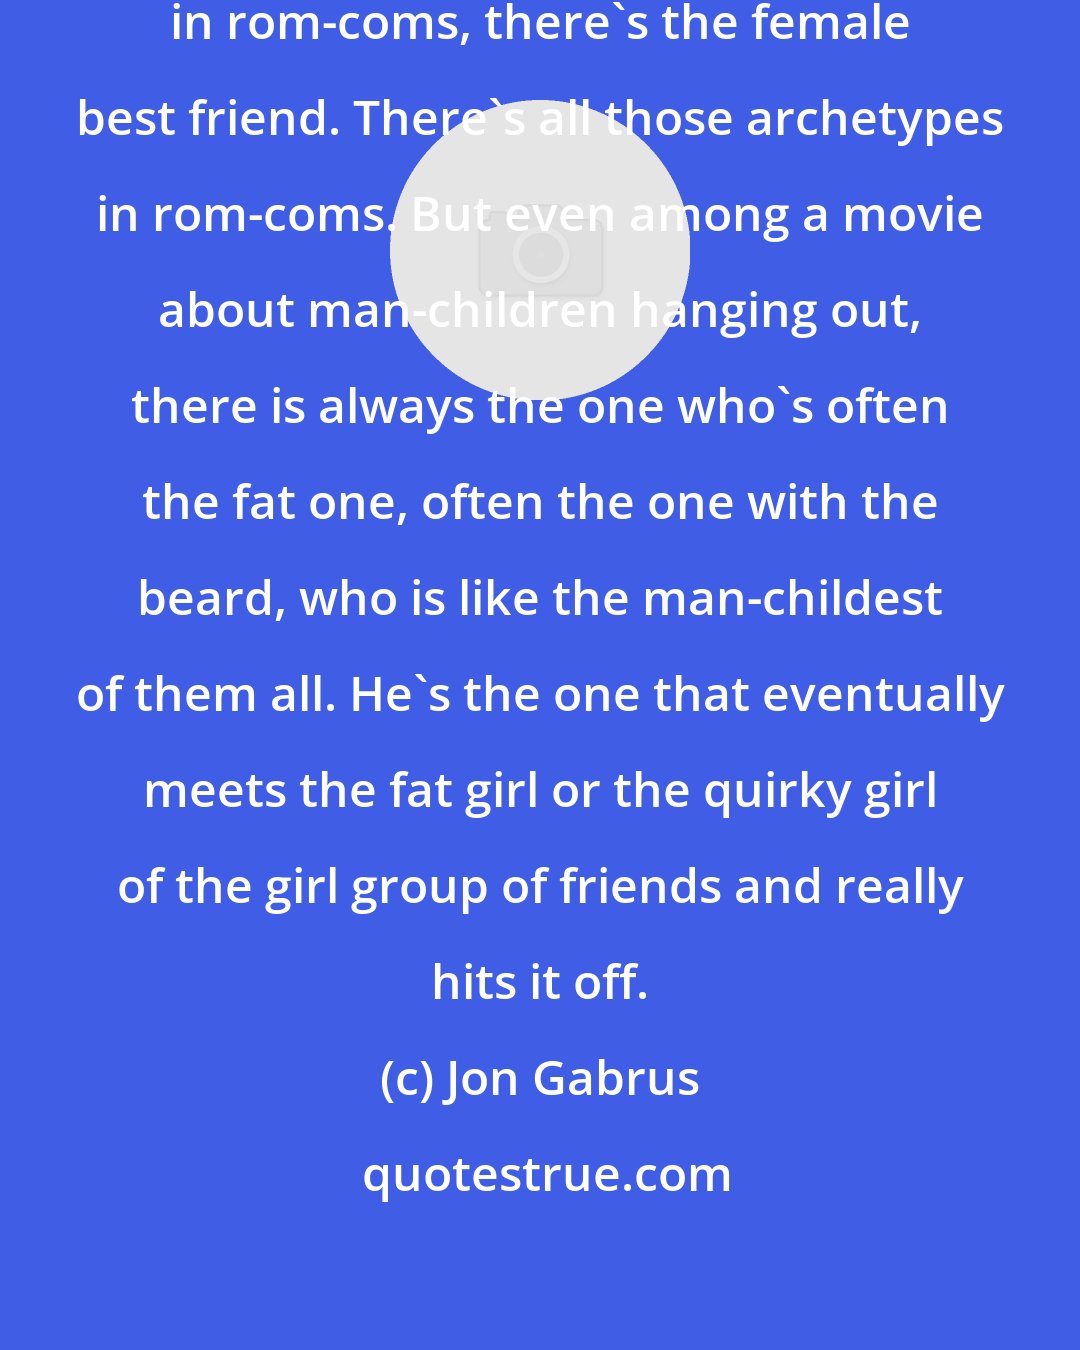 Jon Gabrus: I feel like a lot of people talk about in rom-coms, there's the female best friend. There's all those archetypes in rom-coms. But even among a movie about man-children hanging out, there is always the one who's often the fat one, often the one with the beard, who is like the man-childest of them all. He's the one that eventually meets the fat girl or the quirky girl of the girl group of friends and really hits it off.